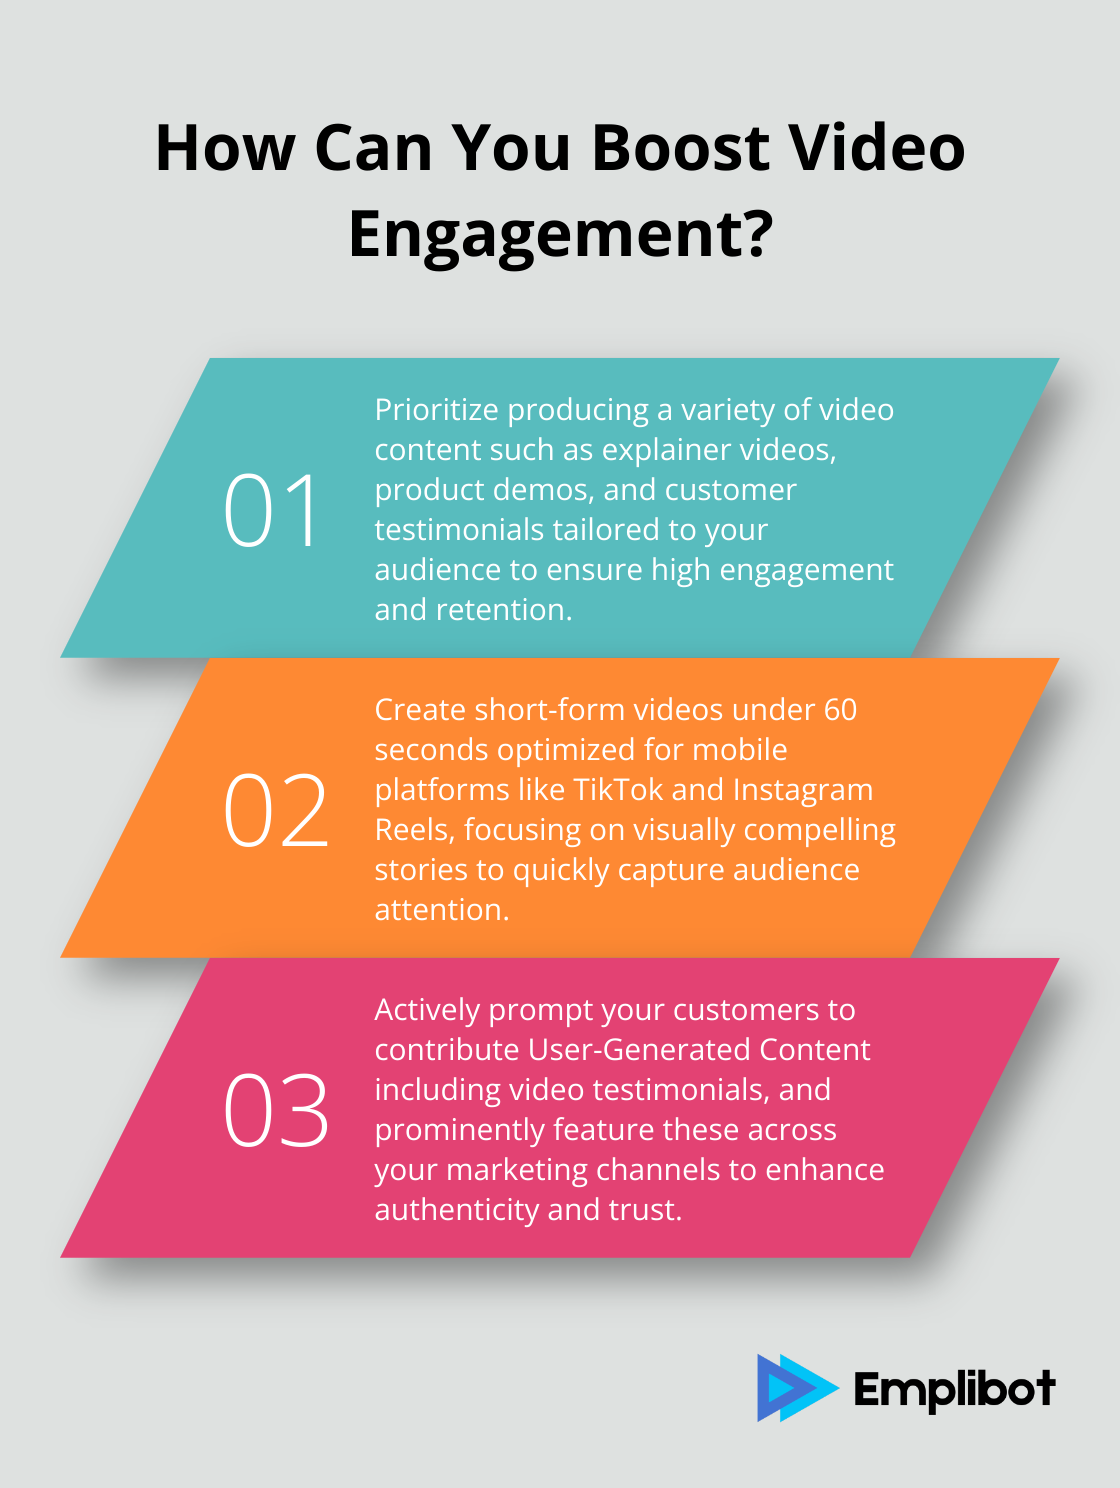 Fact - How Can You Boost Video Engagement?